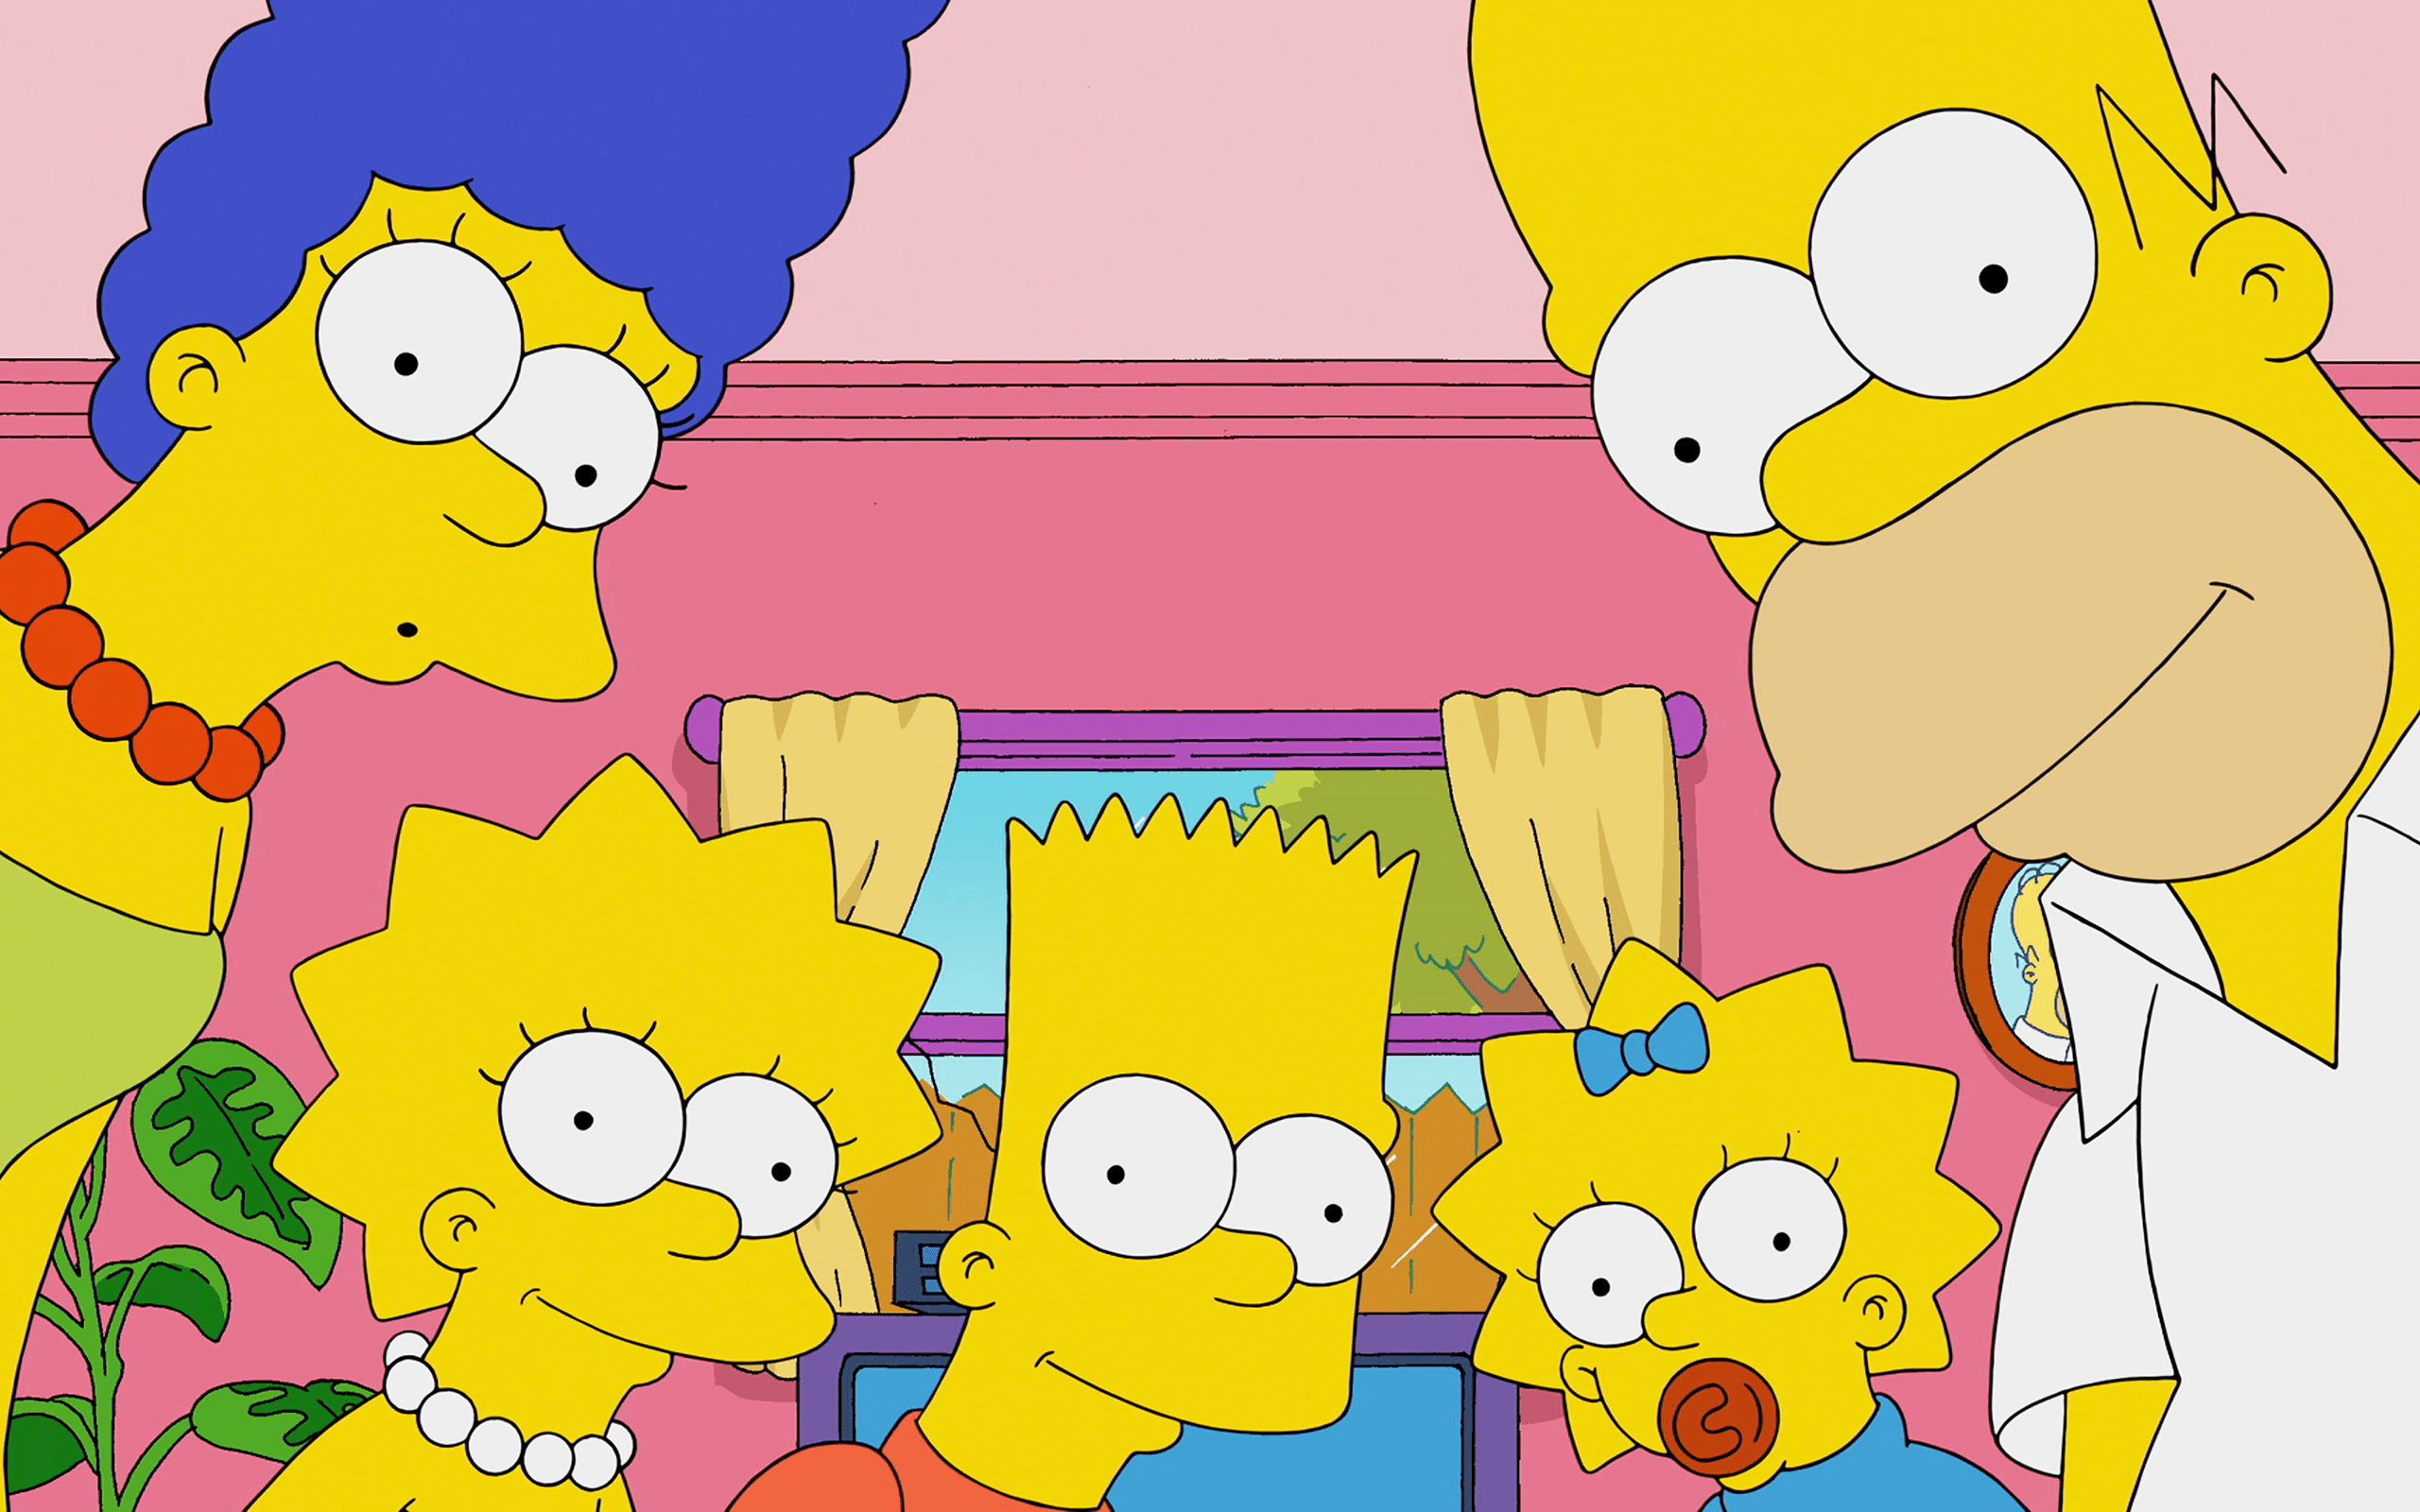 The Simpsons is a long-running animated series about a family of yellow-skinned characters. - Lisa Simpson